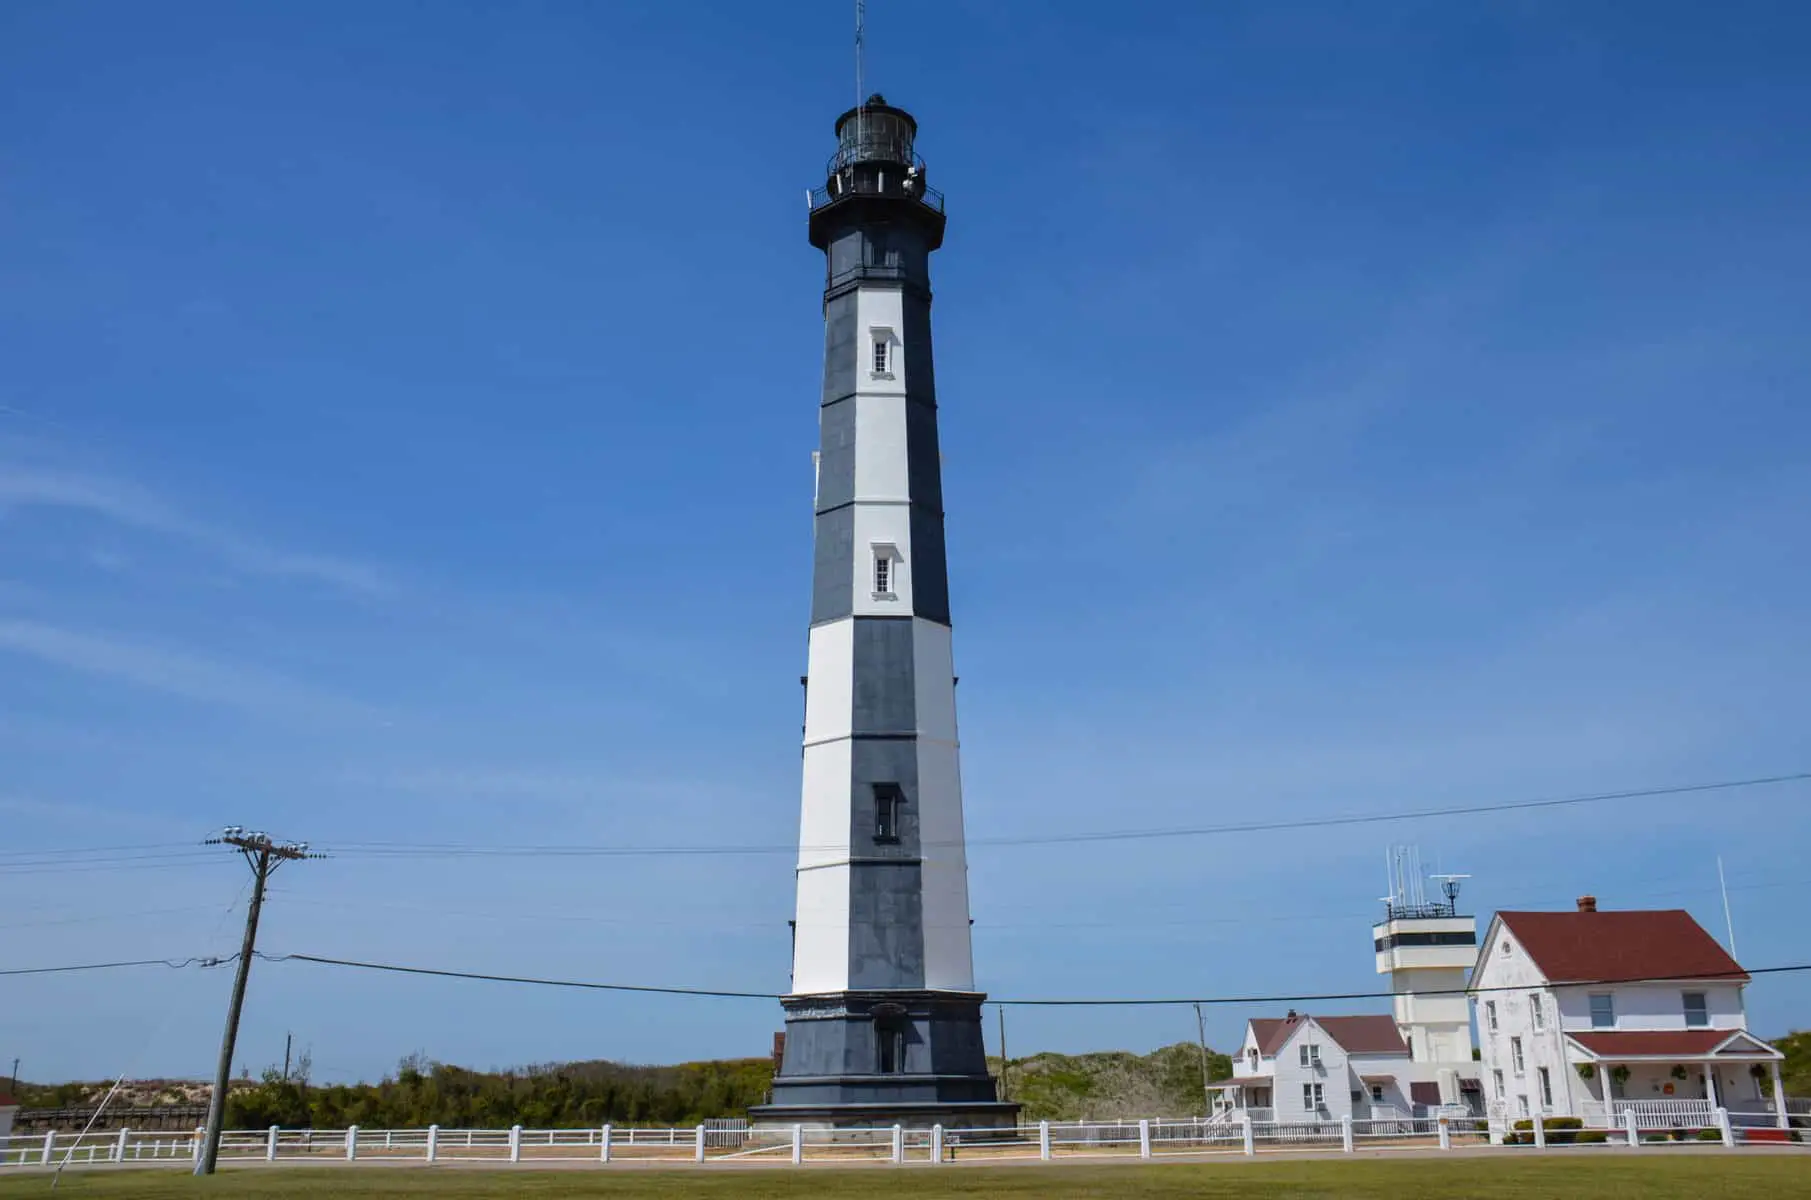 The New Cape Henry Lighthouse in Virginia Beach, Virginia marks the southern entrance to Chesapeake Bay